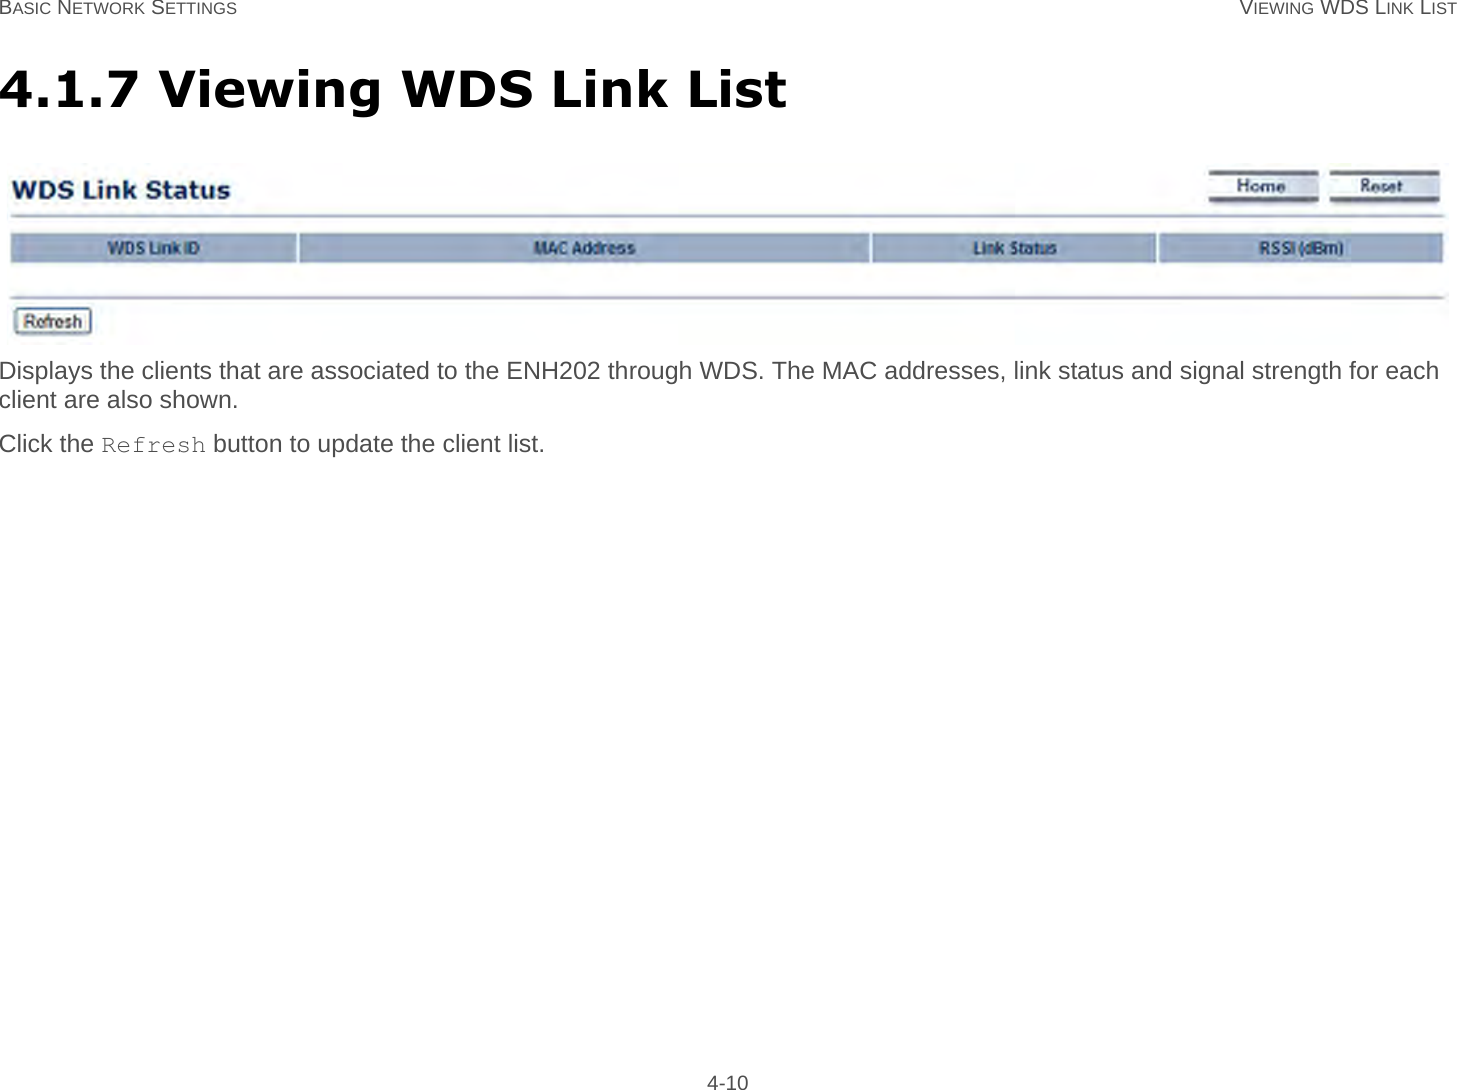 BASIC NETWORK SETTINGS VIEWING WDS LINK LIST 4-104.1.7 Viewing WDS Link ListDisplays the clients that are associated to the ENH202 through WDS. The MAC addresses, link status and signal strength for each client are also shown.Click the Refresh button to update the client list.